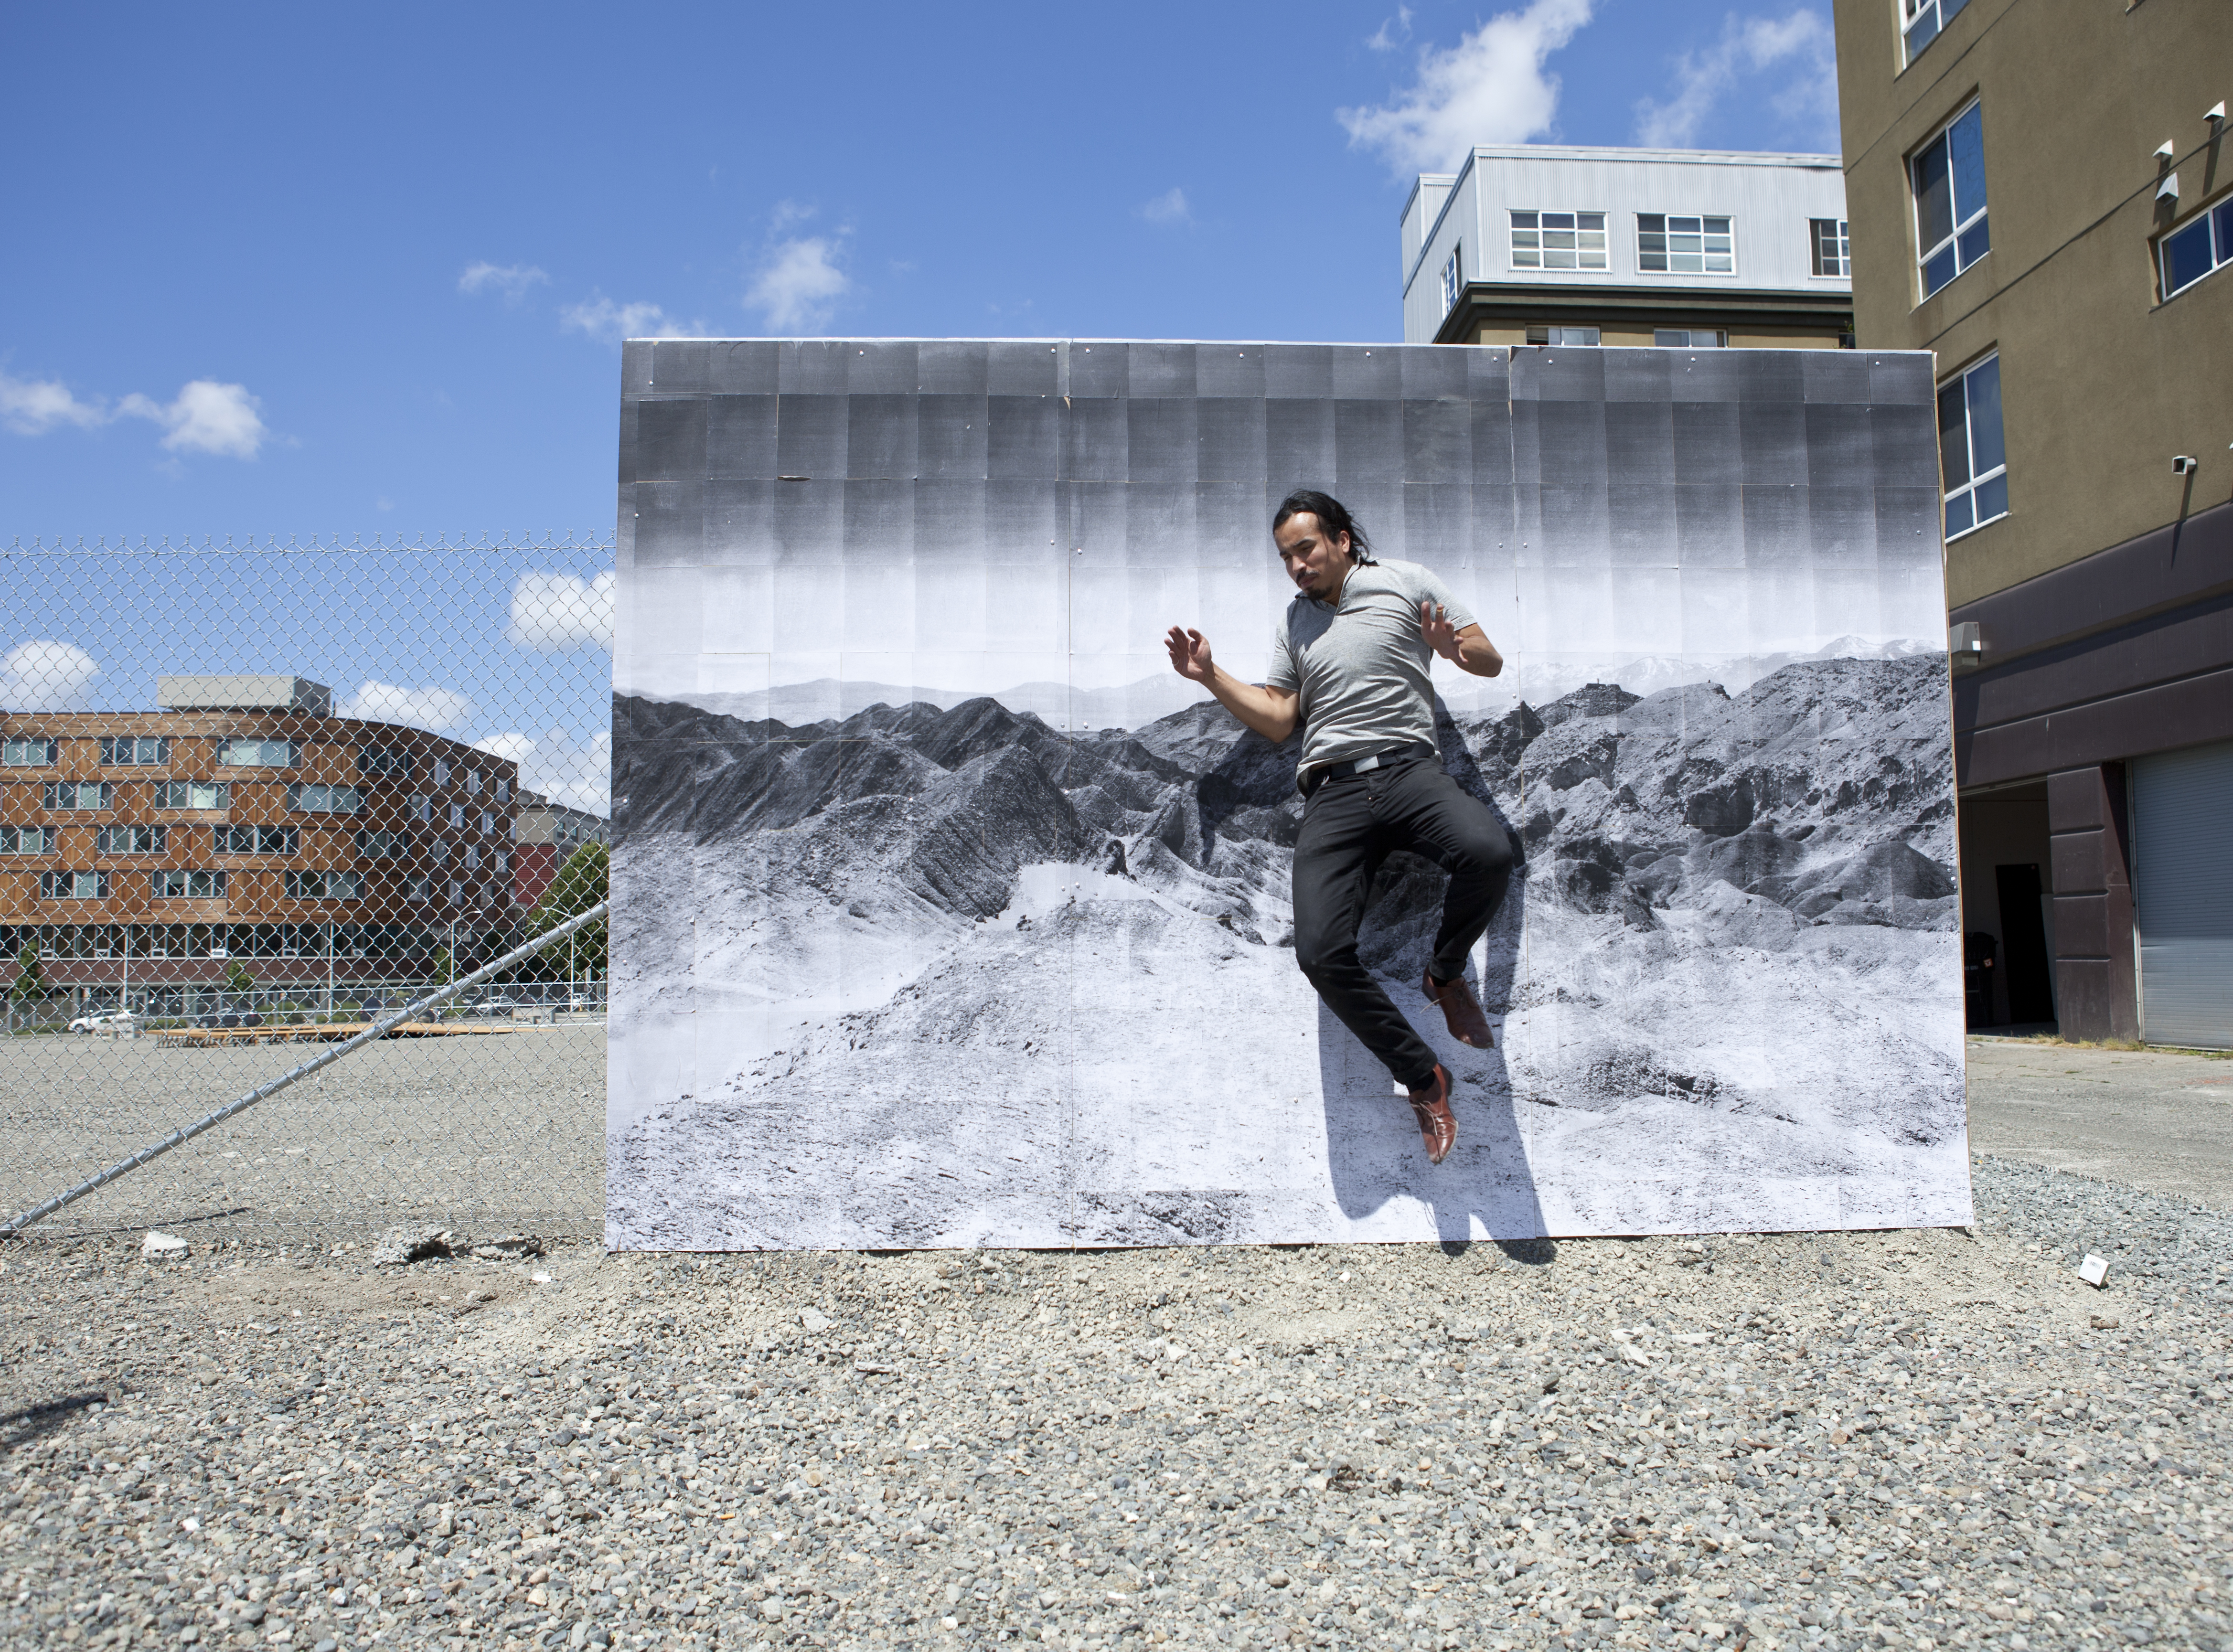 Valenzuela hopes viewers will interact with his new installation. Photo by Anna Erickson